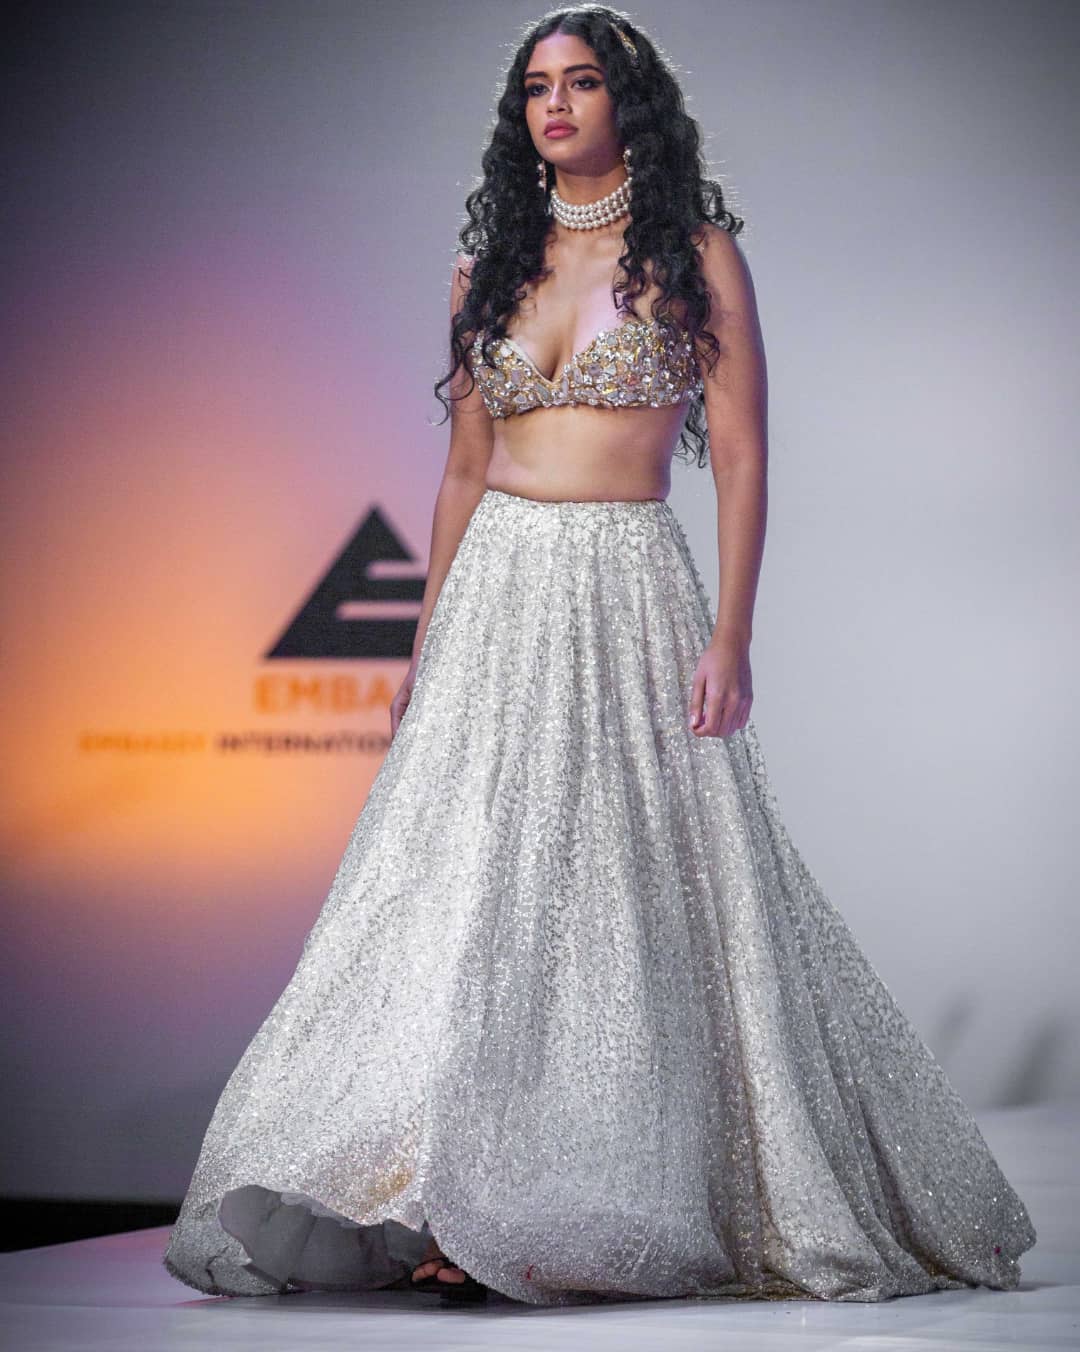 Resin Embellisghed blouse with White Sequin Lehenga1